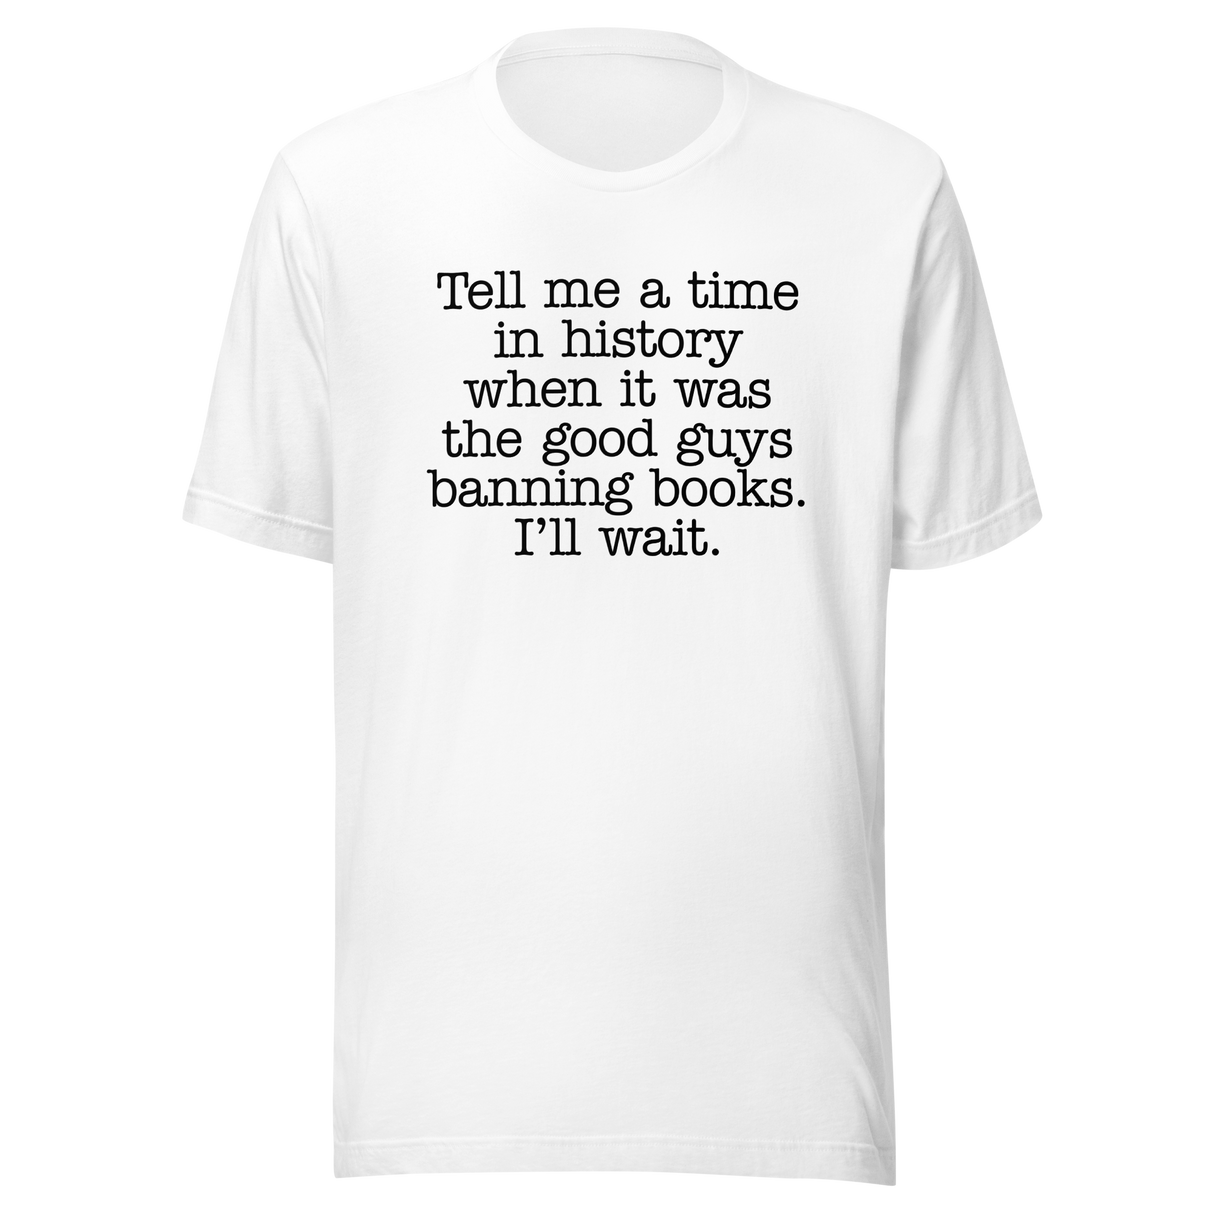 tell-me-a-time-in-history-when-it-was-the-good-guys-banning-books-politics-tee-freedom-t-shirt-censorship-tee-history-t-shirt-rights-tee#color_white